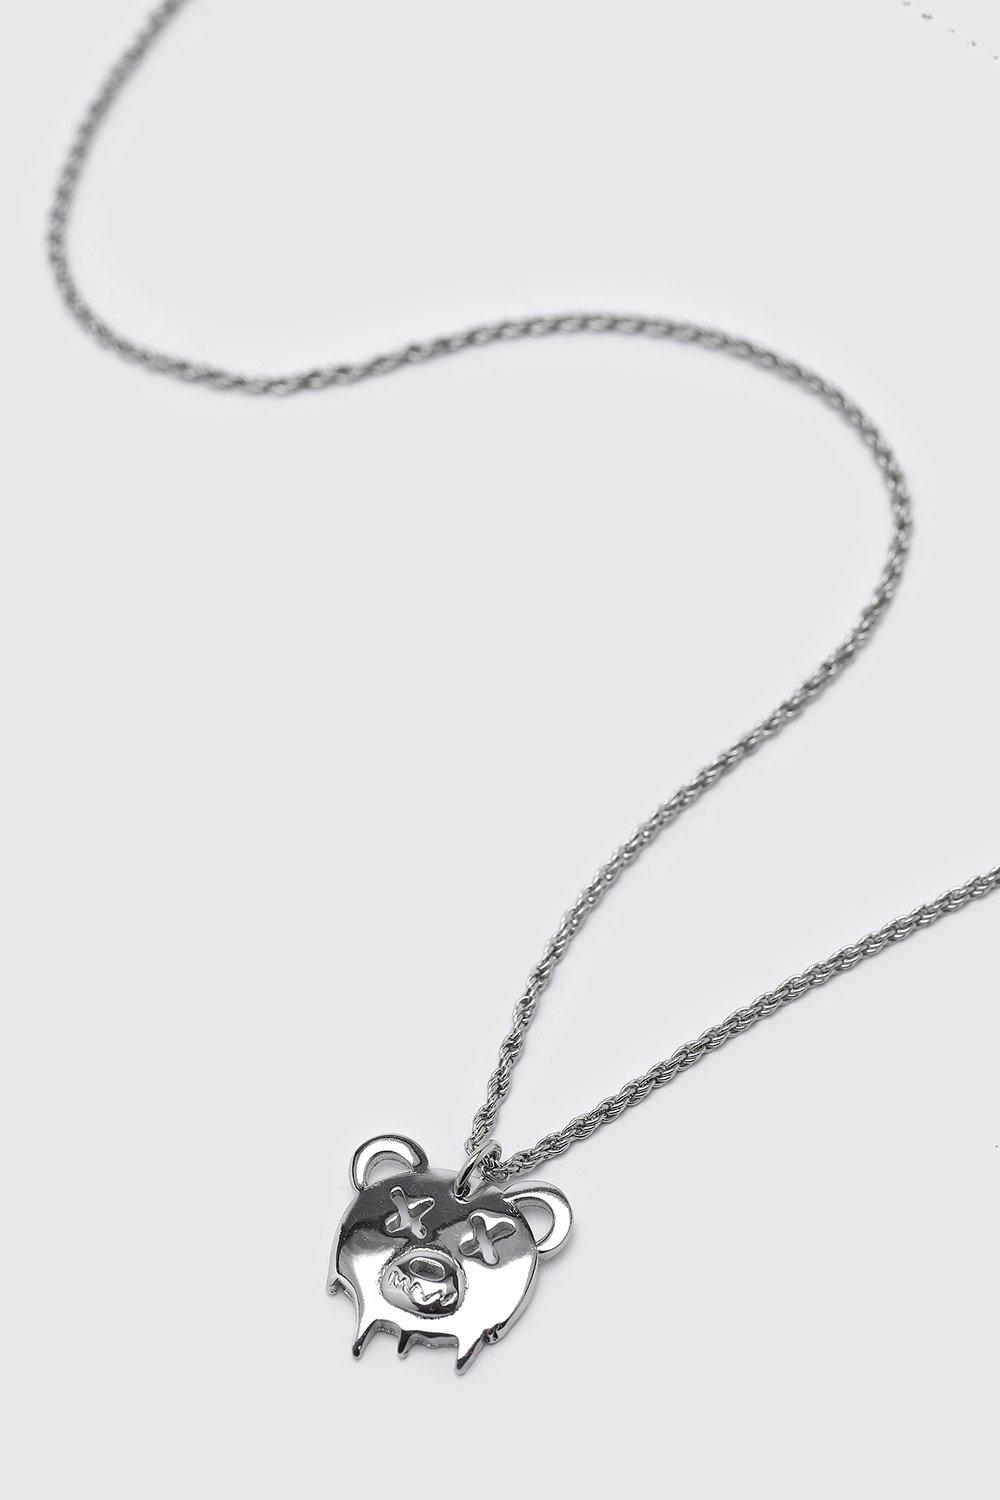 Drippy Ted Necklace, Silver